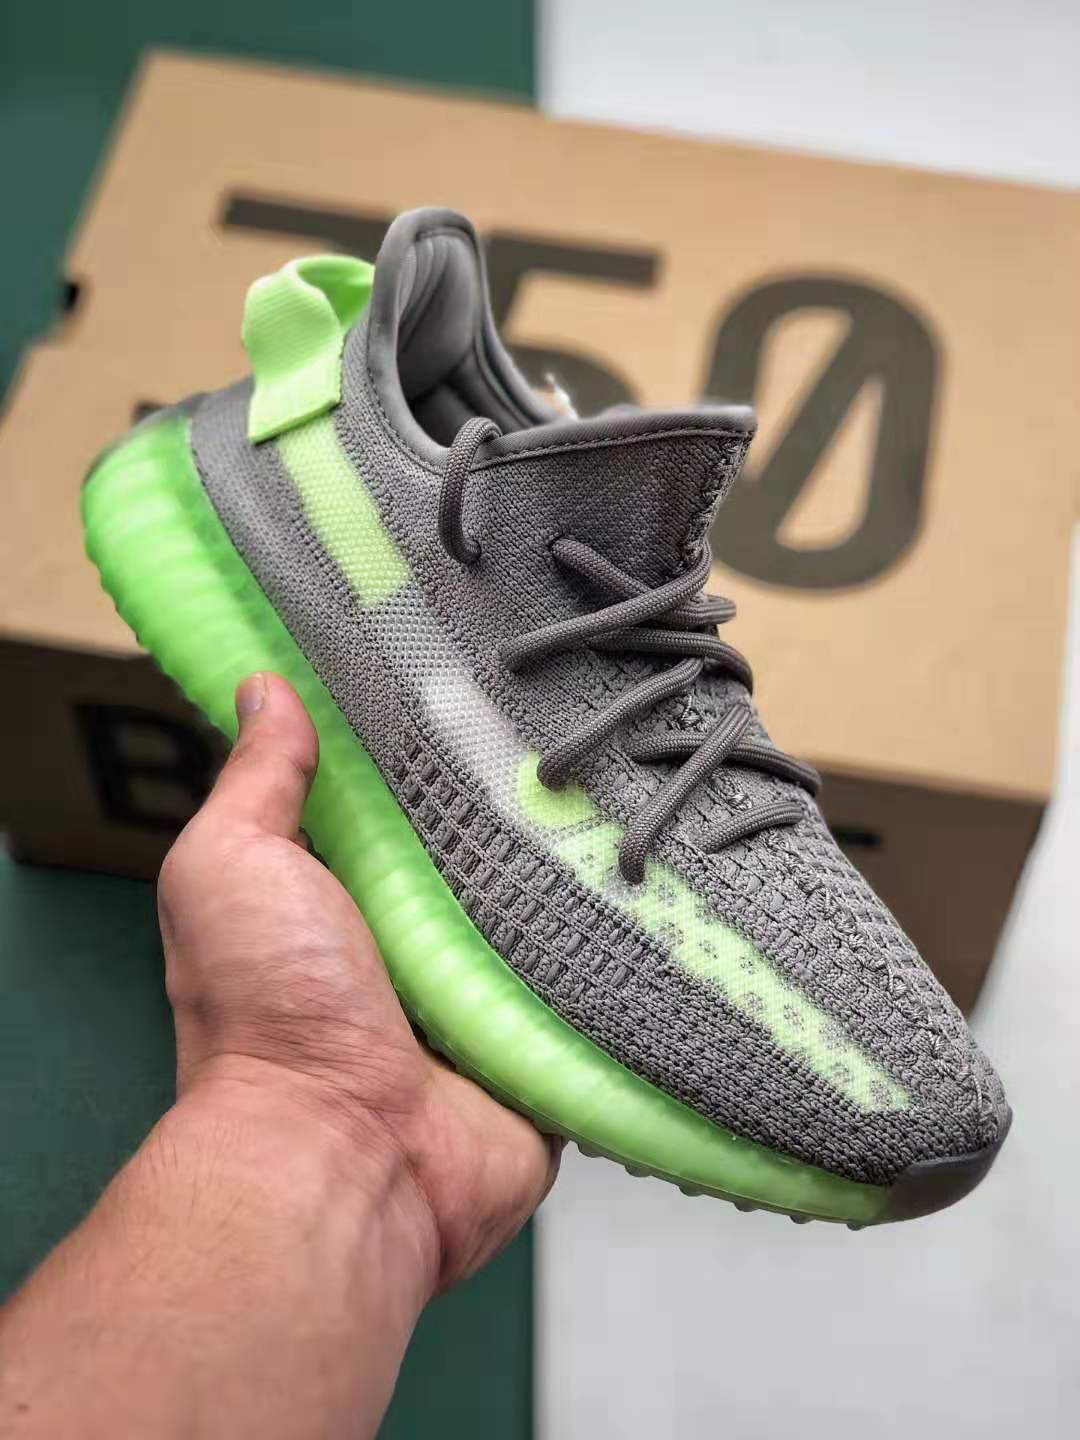 Adidas Yeezy 350 Boost V2 Grey Glow Volt Green EG5560 - Limited Edition Sneakers